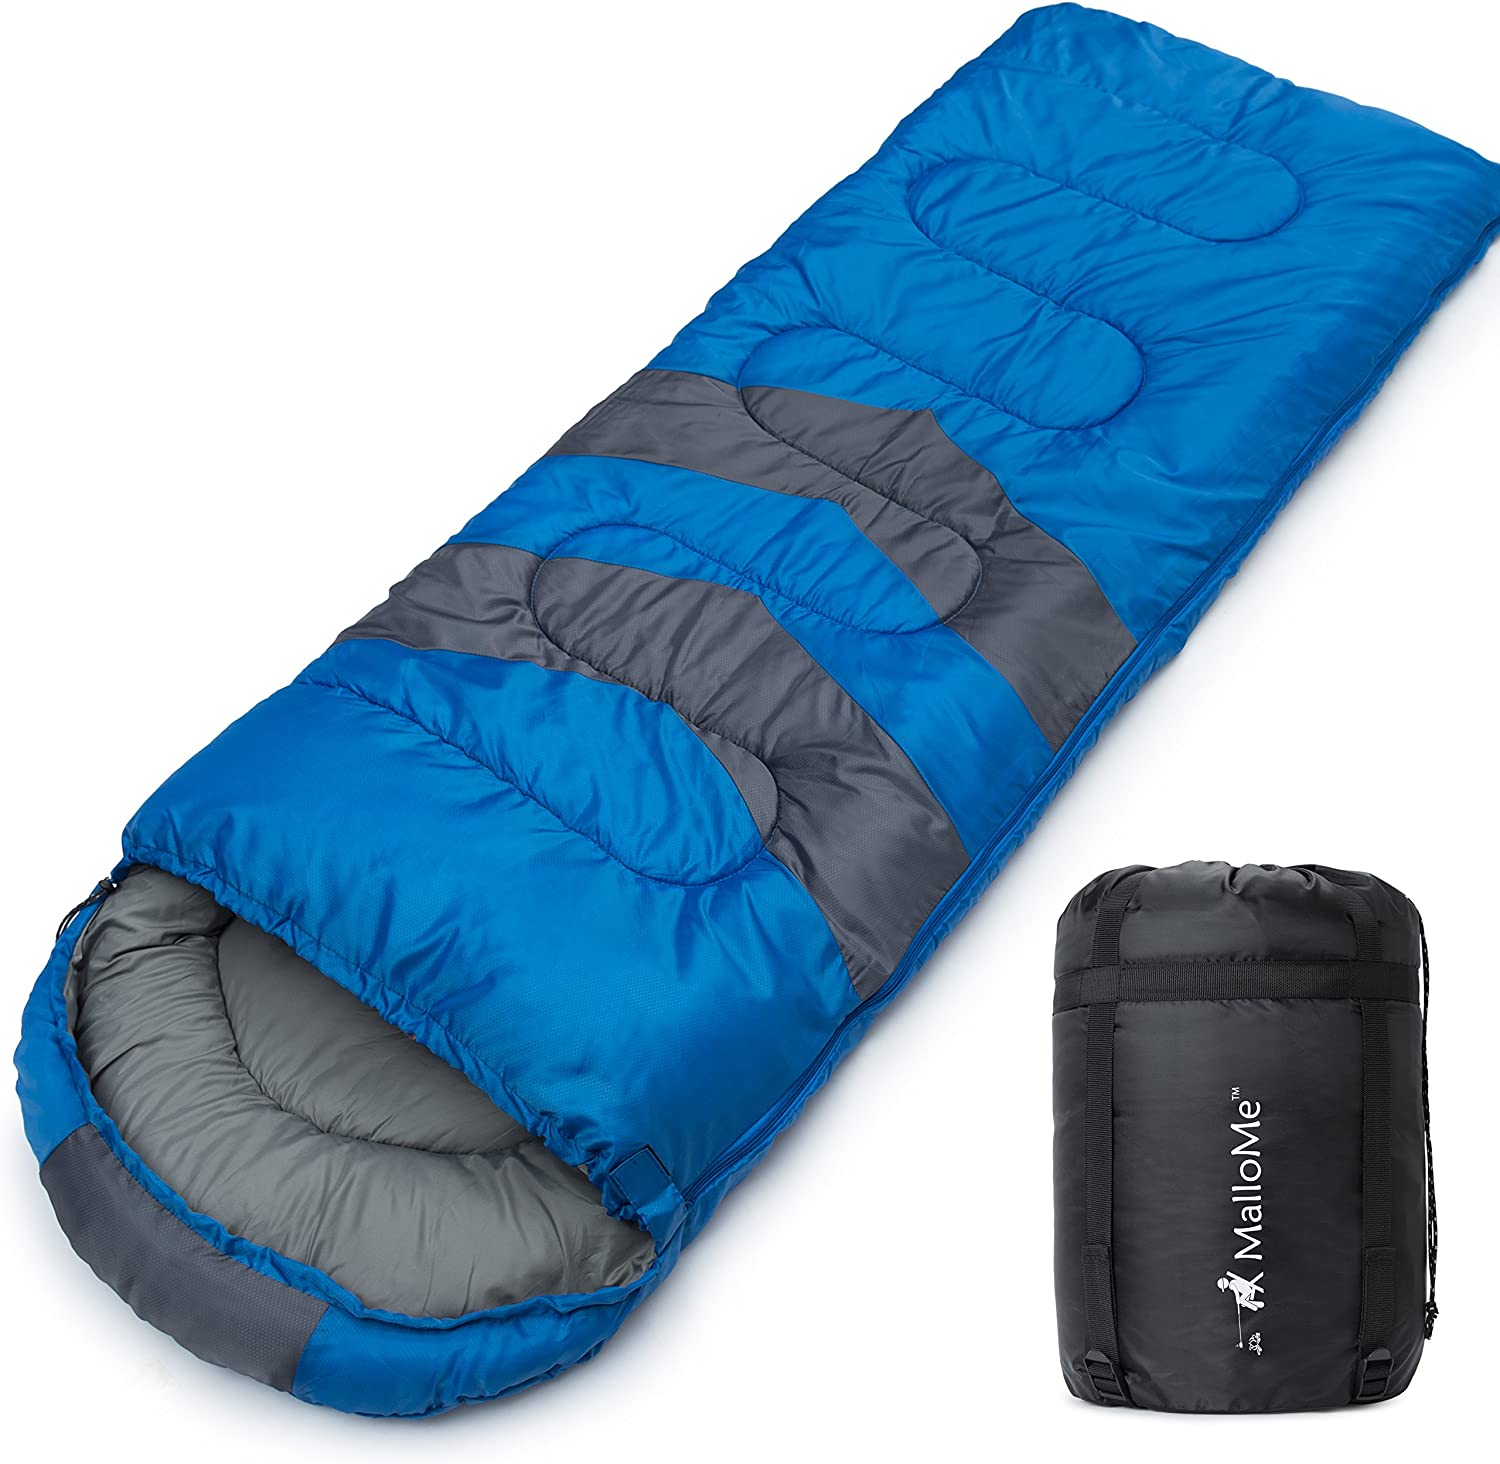 Camping Backpacking Envelope Sleeping Bags 4 Seasons Warm or Cold Lightweight Indoor Outdoor Sleeping Bags for Adults